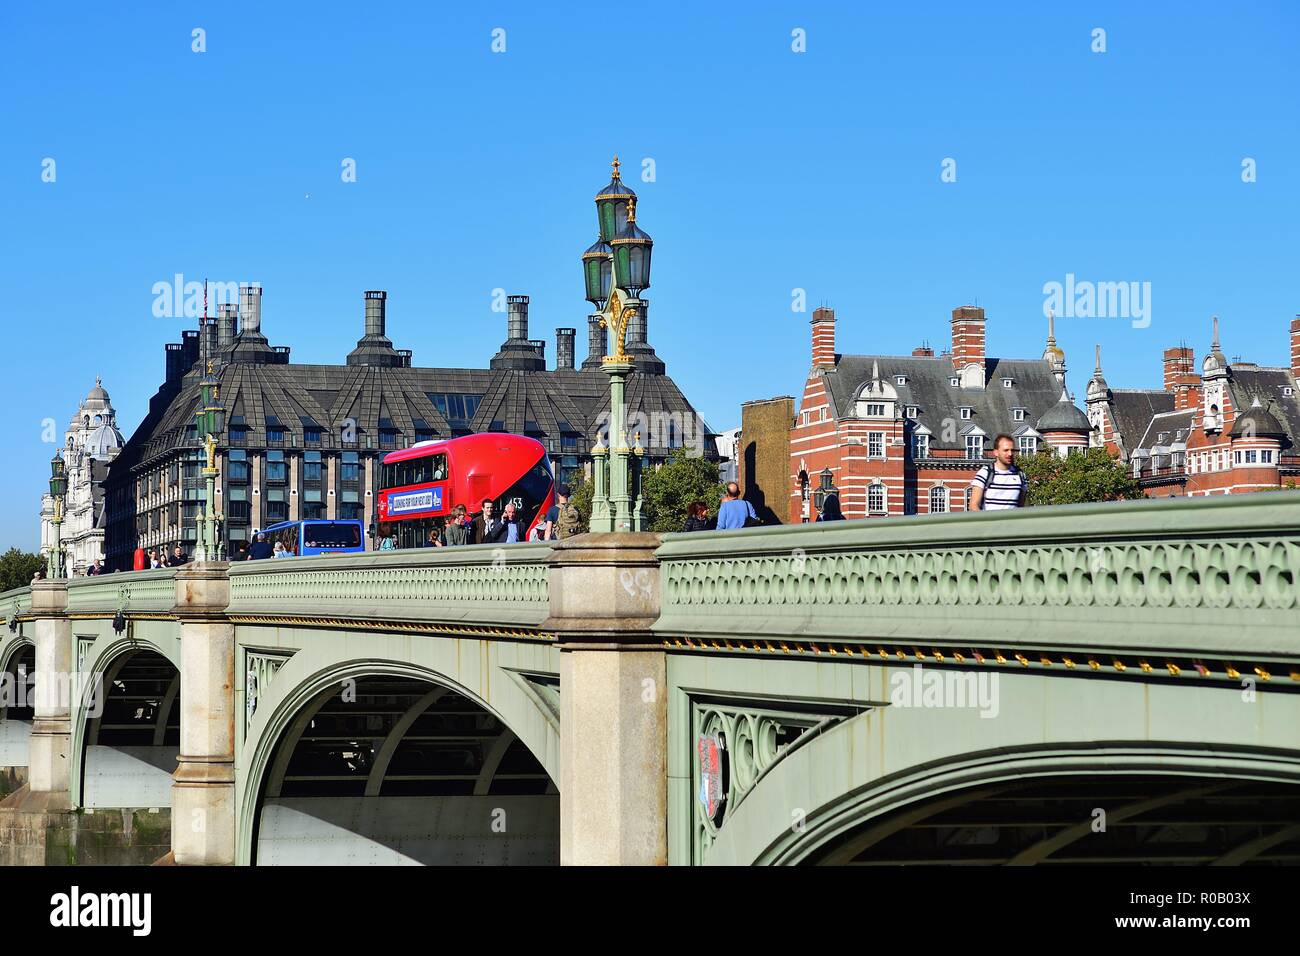 London, England, United Kingdom. A double-deckerr bus crosses the Westminster Bridge over the River Thames. Stock Photo